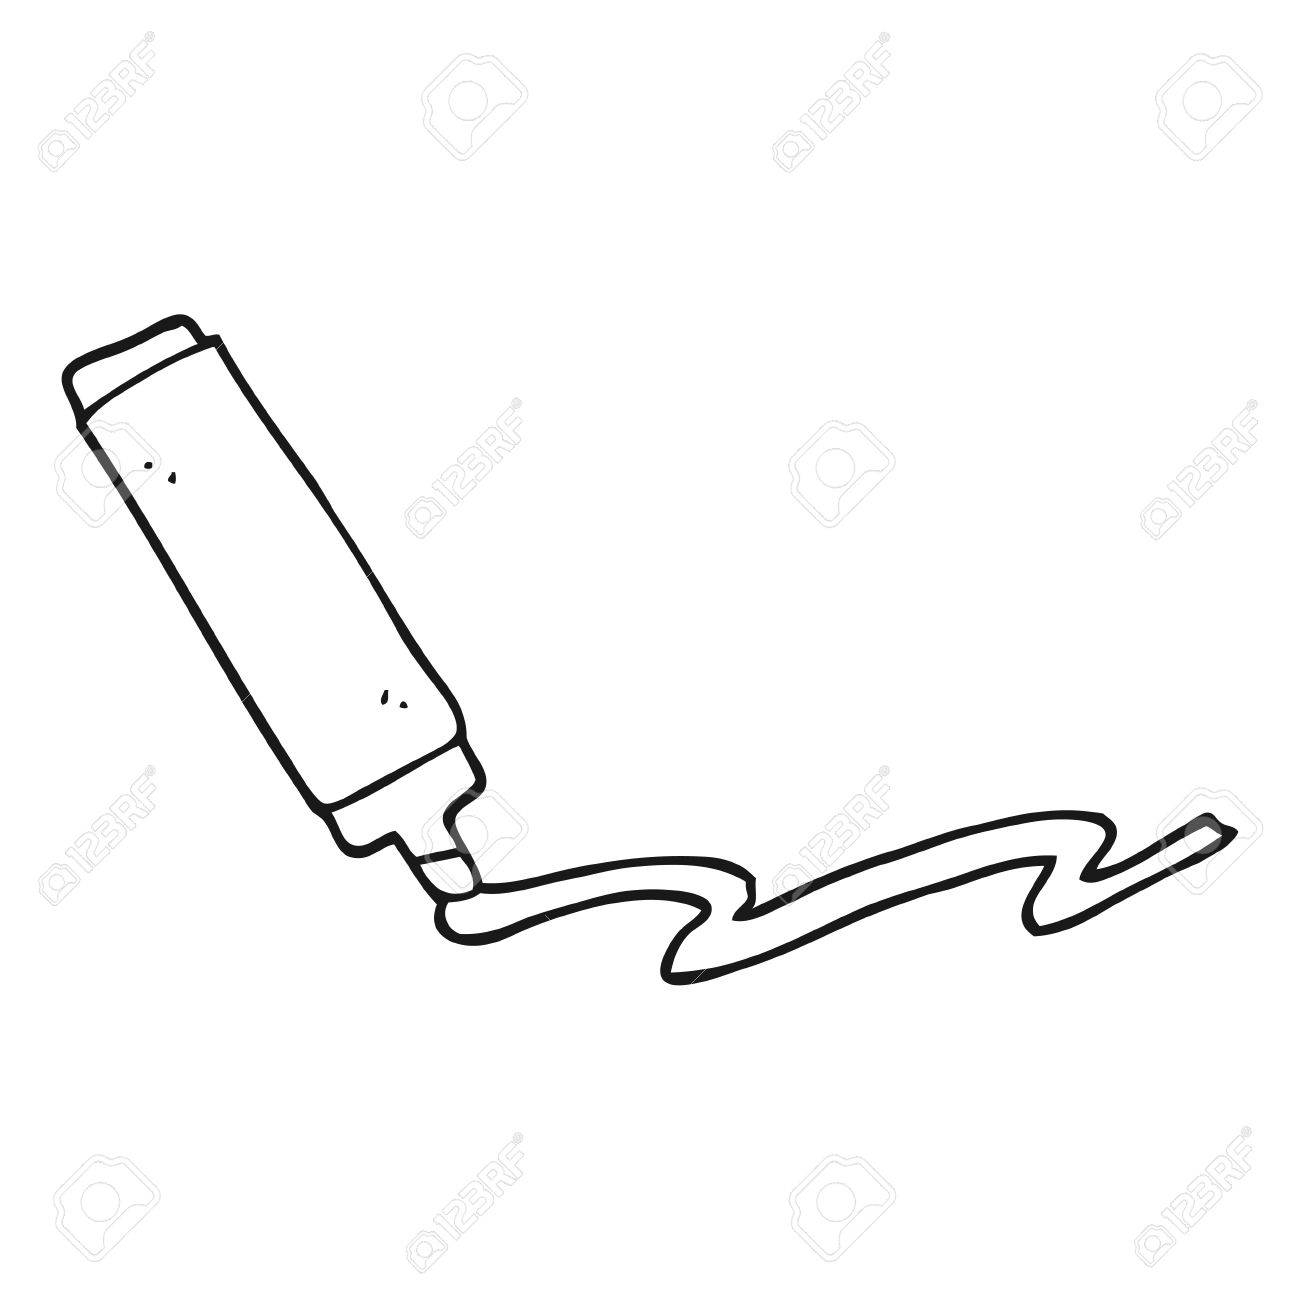 marker clipart animated